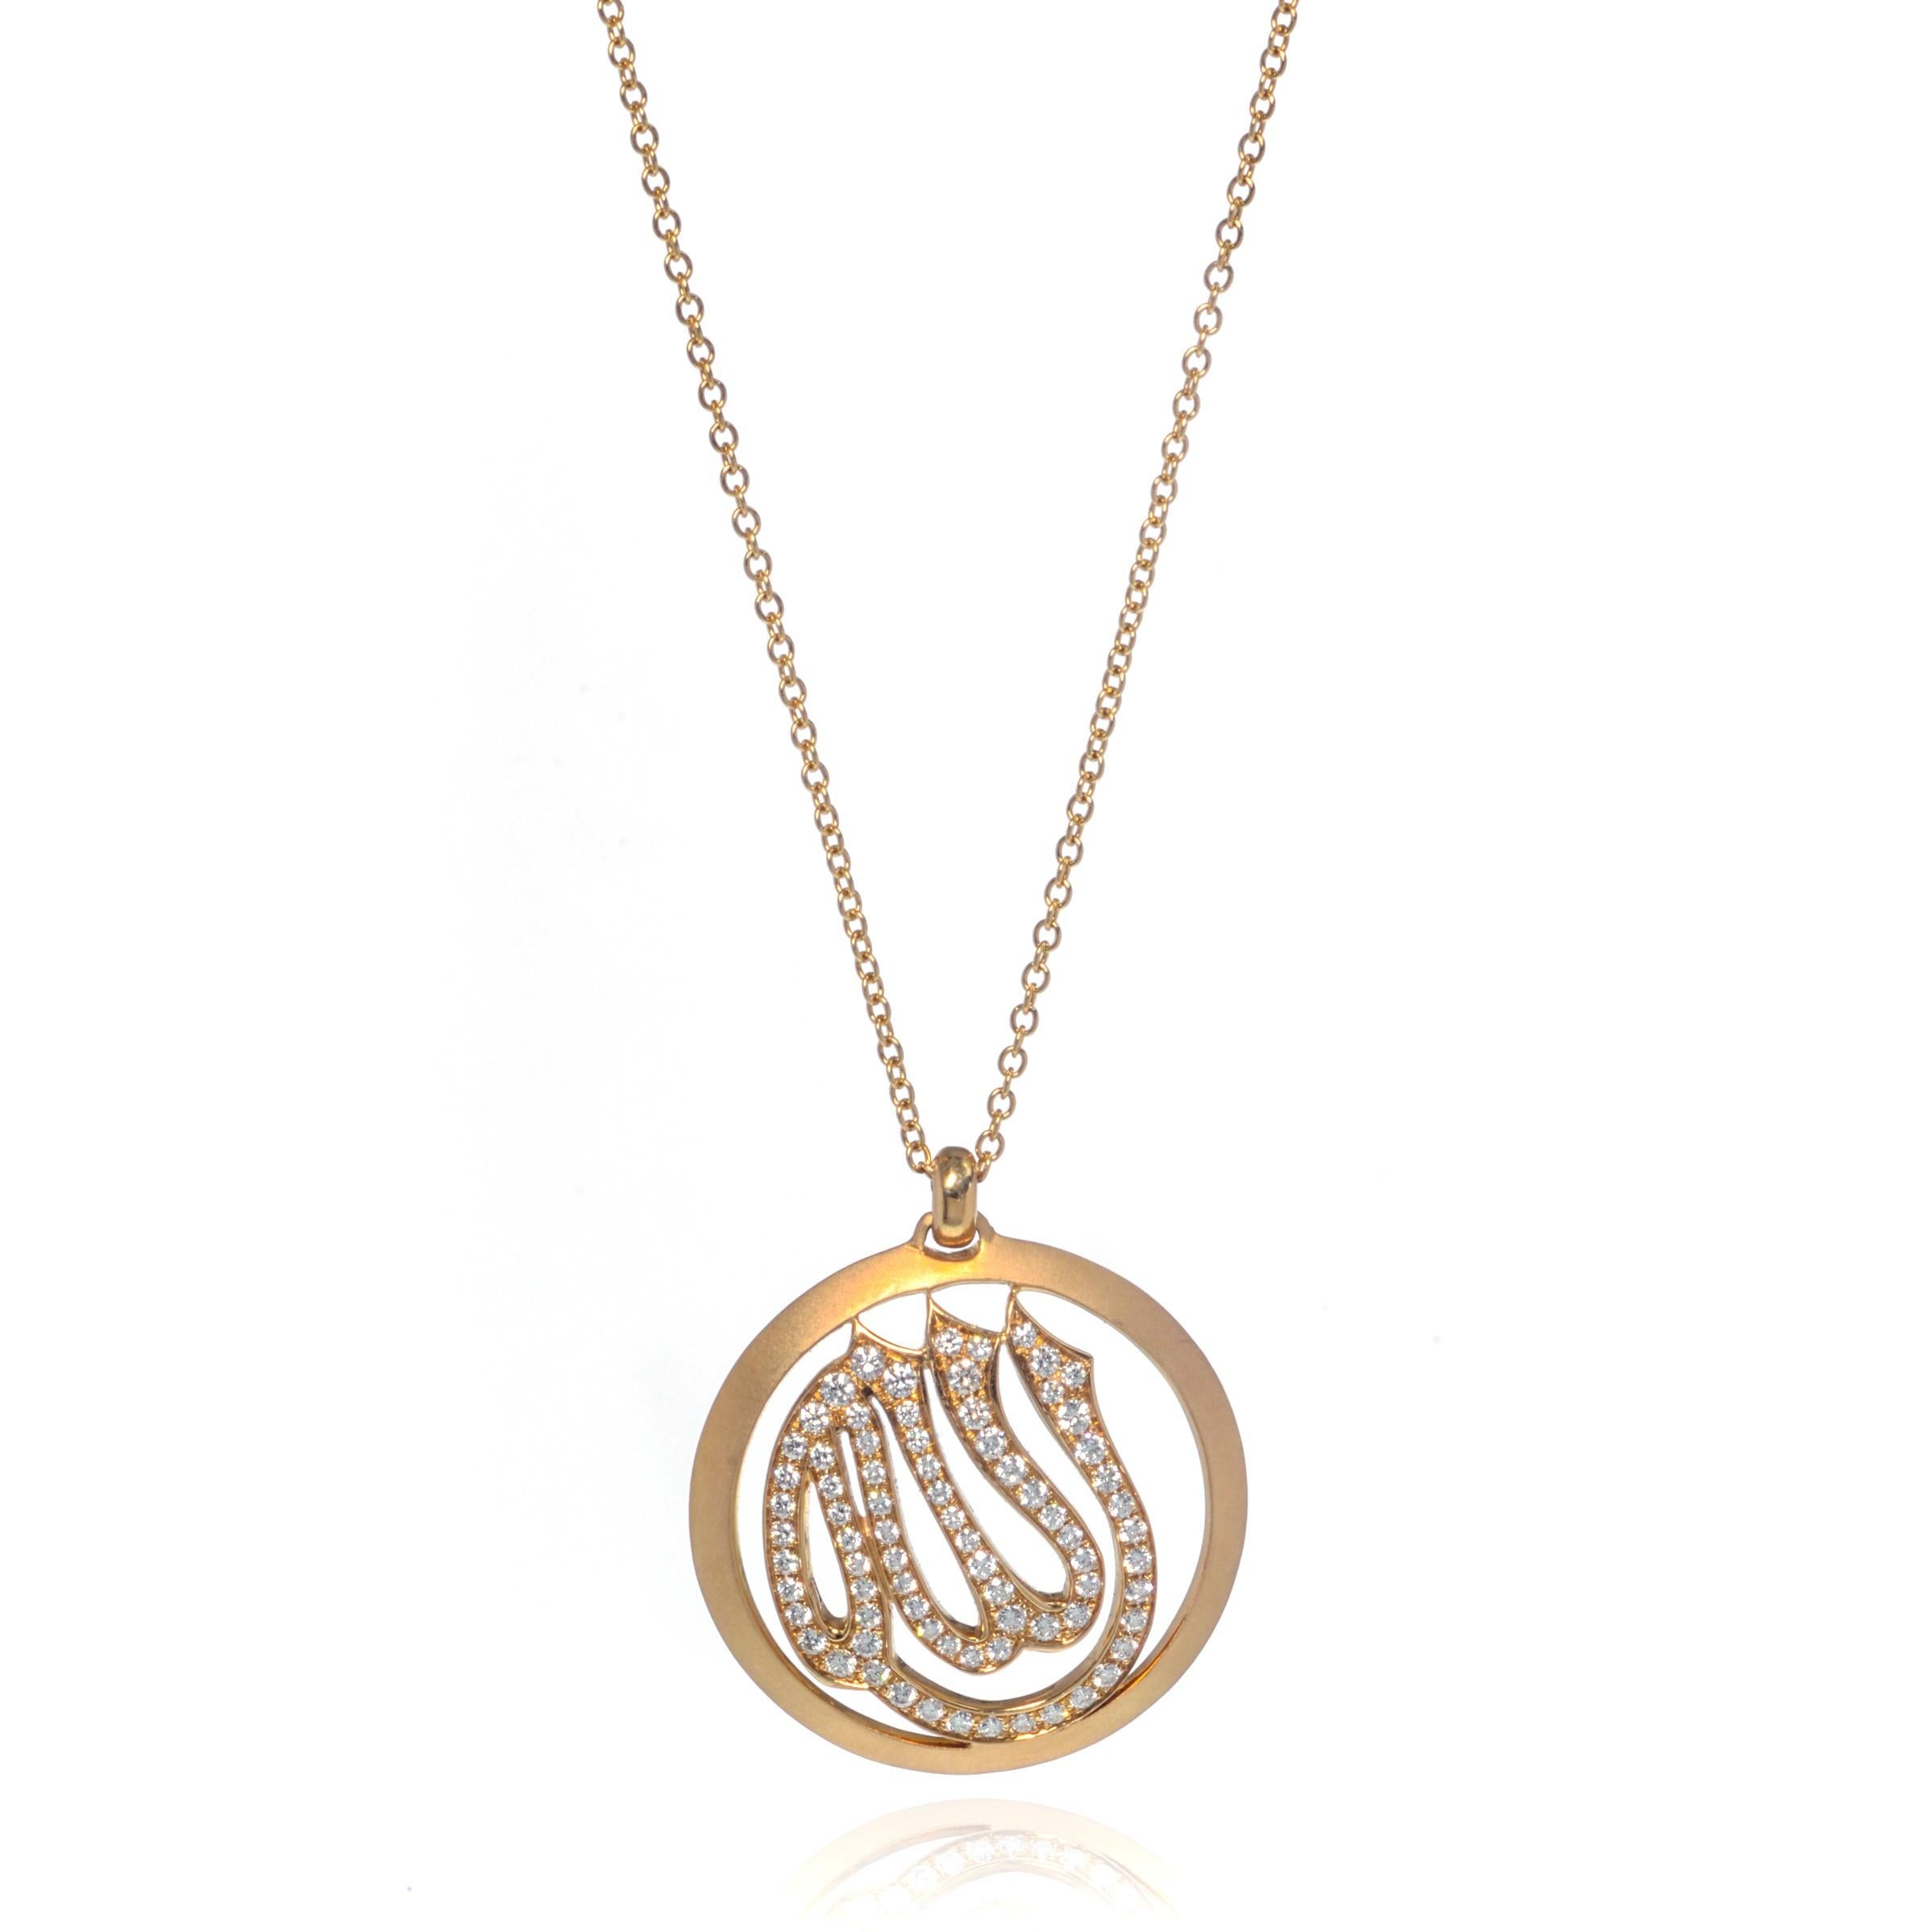 This 18k yellow gold pendant necklace features brilliant diamonds 0.95cttw, with a beautiful satin yellow gold Arabic symbol for Allah. The pendant is on a delicate 18k yellow gold chain. Total carat weight: 0.95. Diamond color G and VVS clarity.